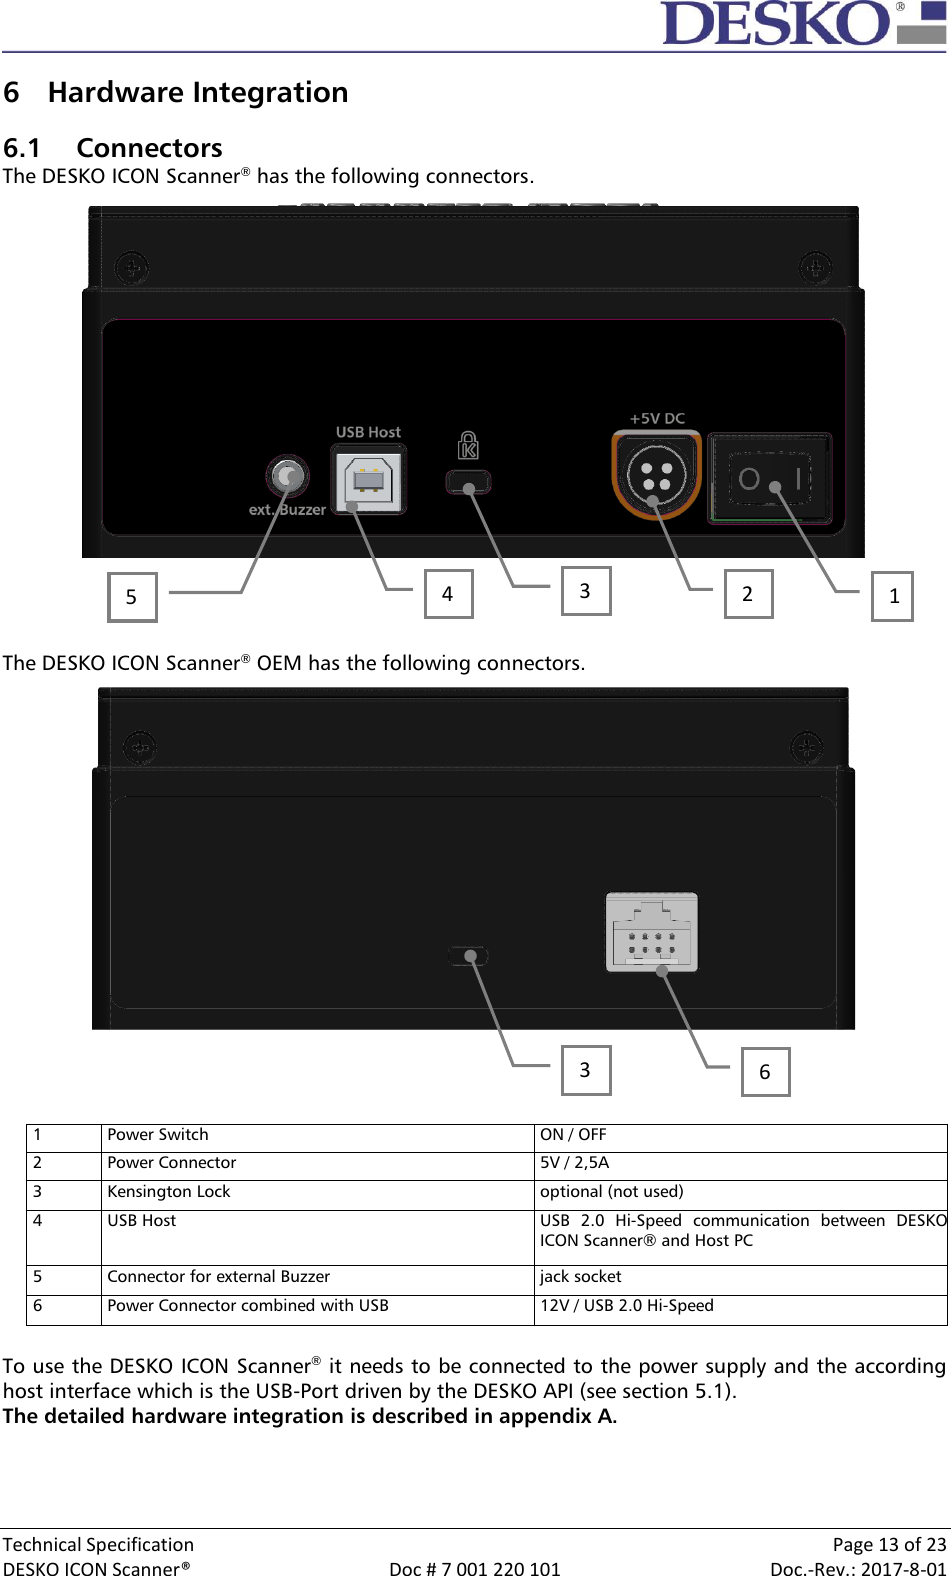  Technical Specification    Page 13 of 23 DESKO ICON Scanner®  Doc # 7 001 220 101  Doc.-Rev.: 2017-8-01  6 Hardware Integration 6.1 Connectors The DESKO ICON Scanner® has the following connectors.     The DESKO ICON Scanner® OEM has the following connectors.     1 Power Switch  ON / OFF 2 Power Connector 5V / 2,5A 3 Kensington Lock optional (not used) 4 USB Host USB  2.0  Hi-Speed  communication  between  DESKO ICON Scanner® and Host PC 5 Connector for external Buzzer jack socket 6 Power Connector combined with USB 12V / USB 2.0 Hi-Speed  To use the DESKO ICON Scanner® it needs to be connected to the power supply and the according host interface which is the USB-Port driven by the DESKO API (see section 5.1).  The detailed hardware integration is described in appendix A. 2 3 4 5 1 6 3 